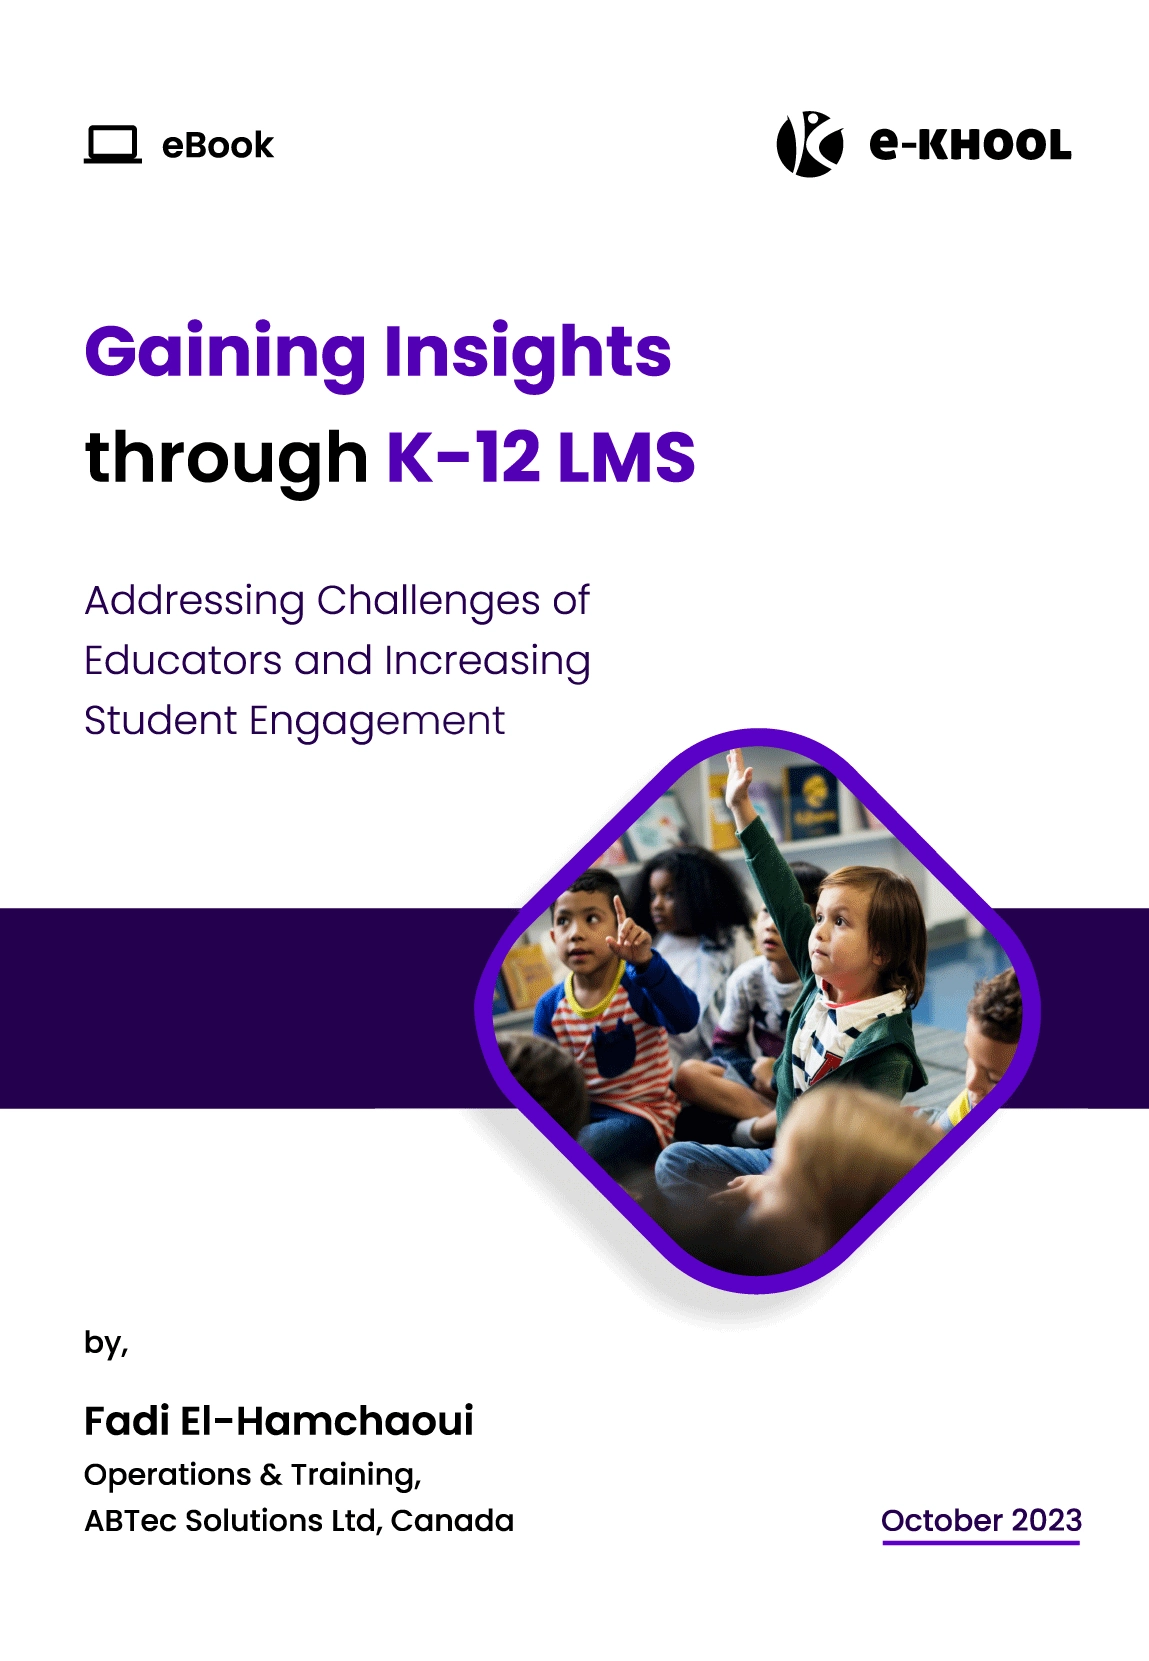 Download the e-book for K12 Learning Management System addressing challenges and student engagements